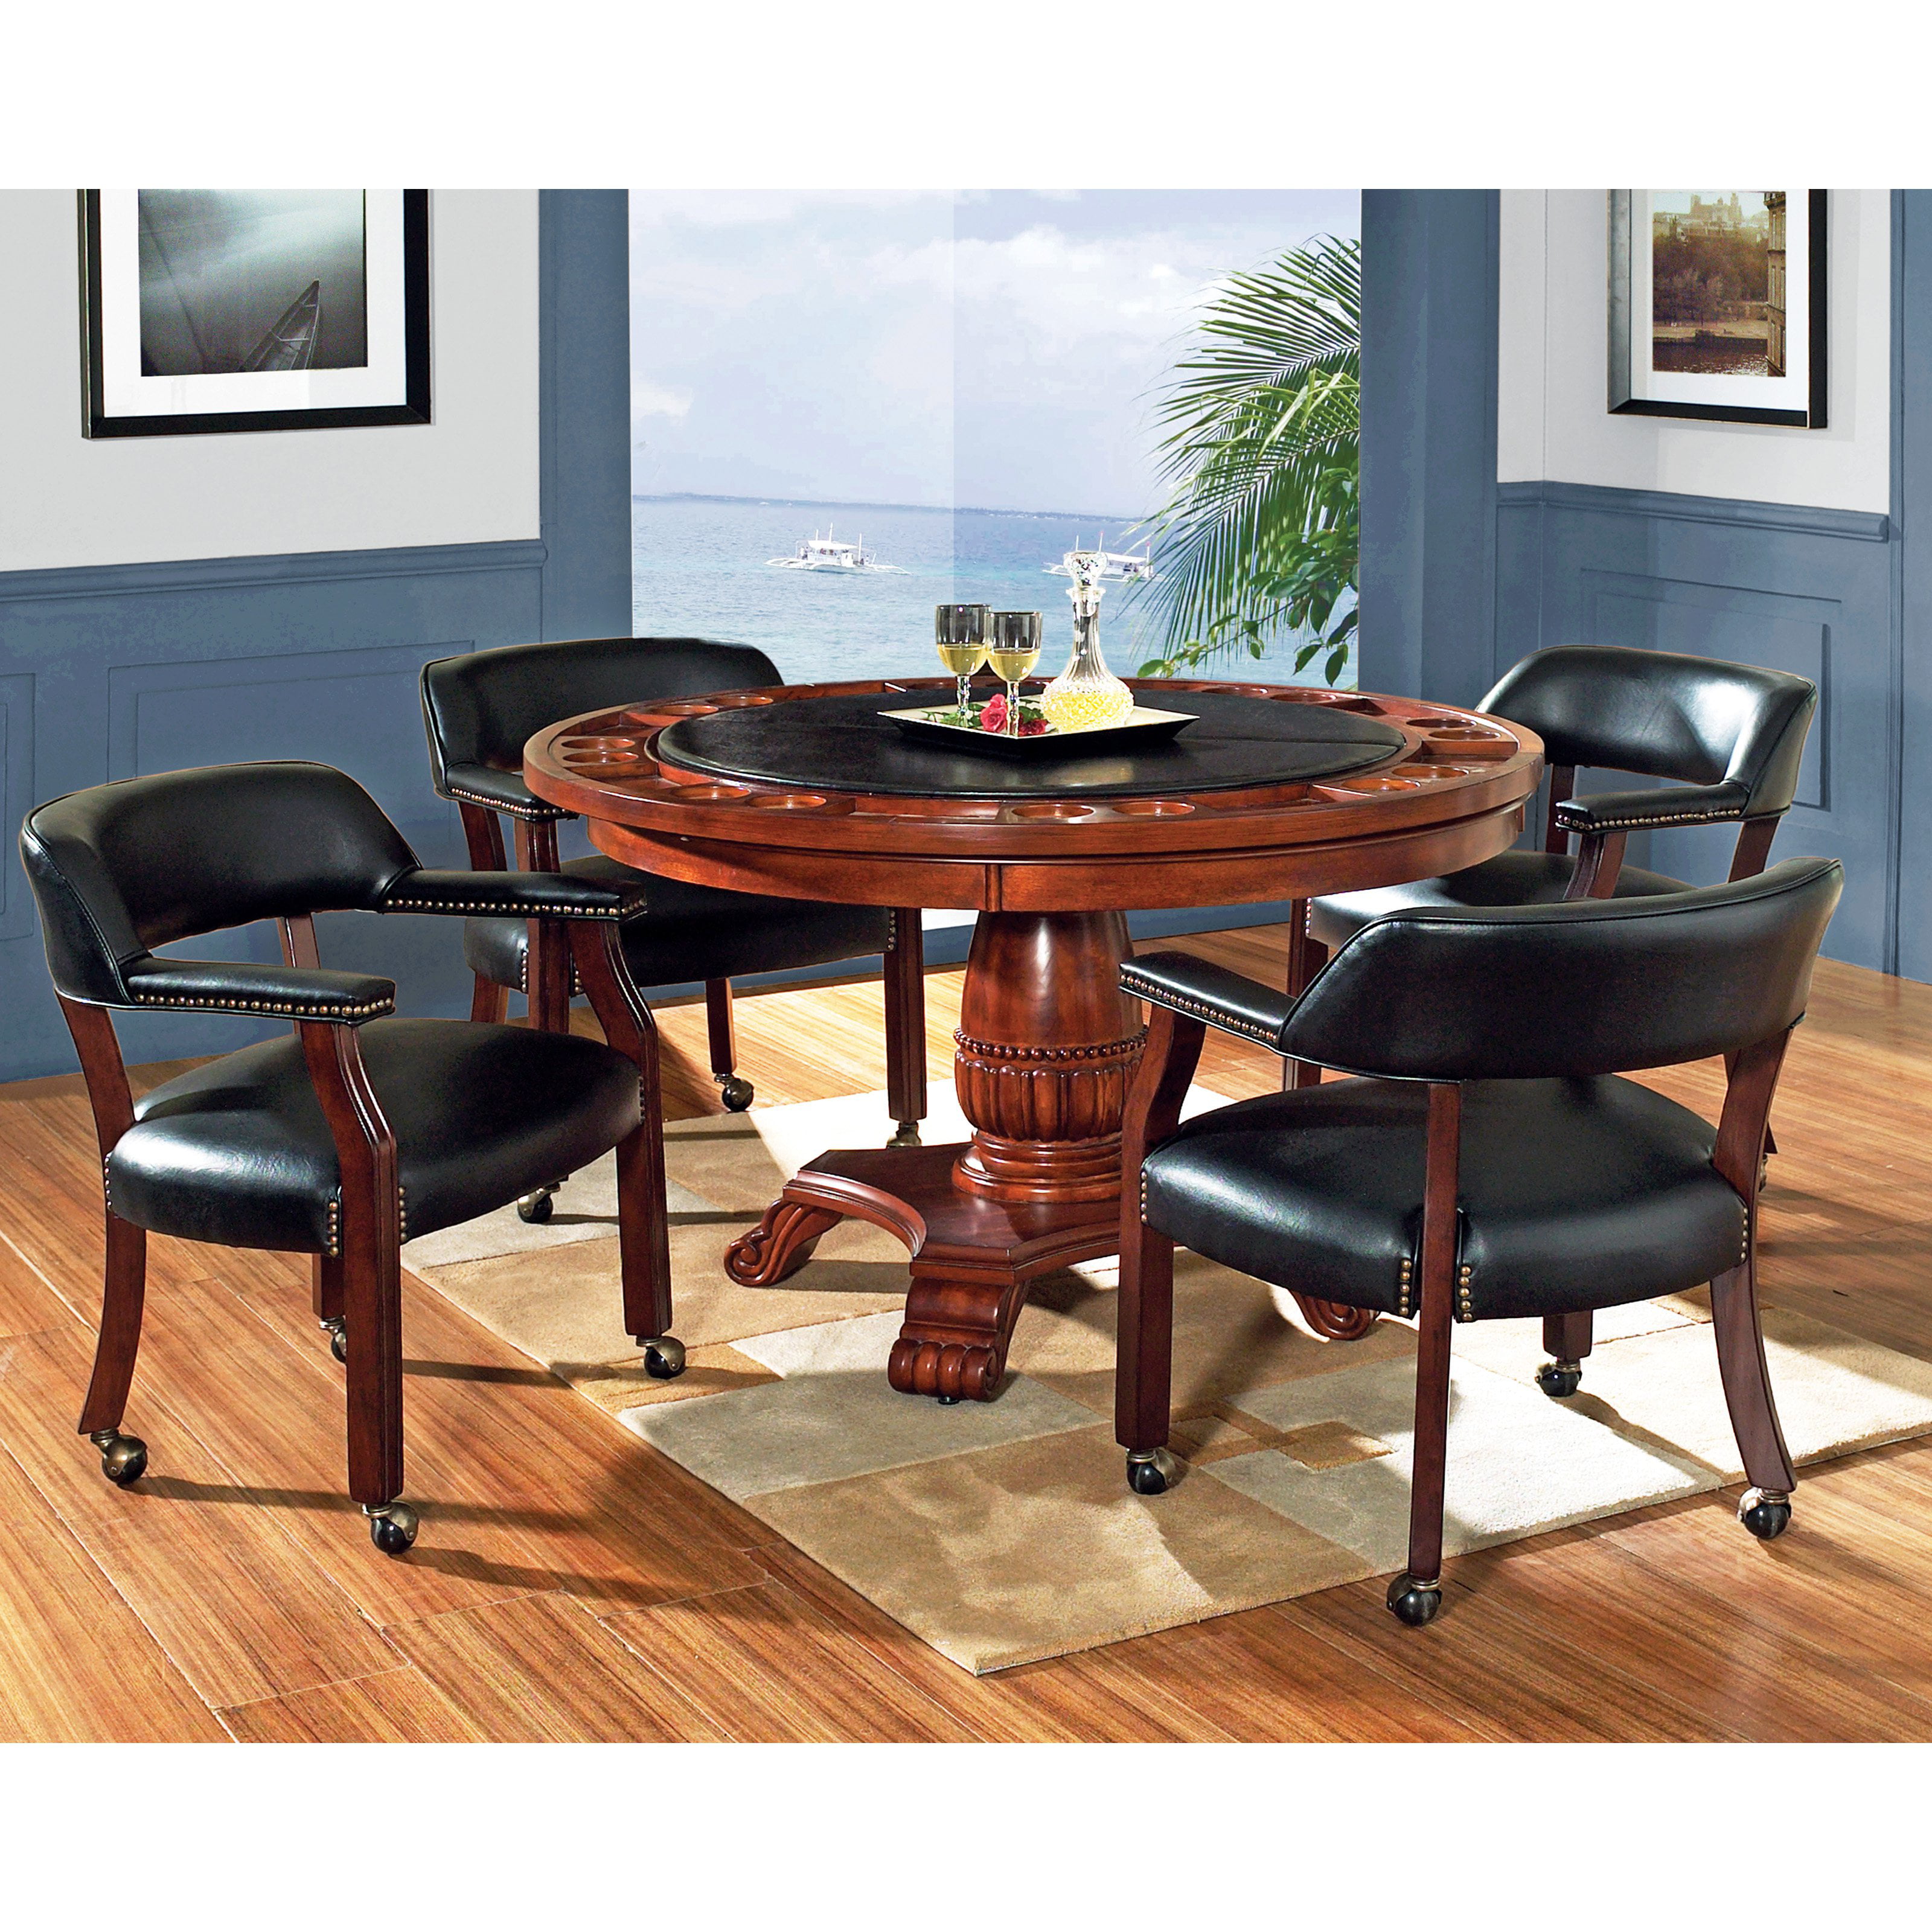 Steve Silver Tournament Arm Chairs With, Dining Room Table Set With Casters